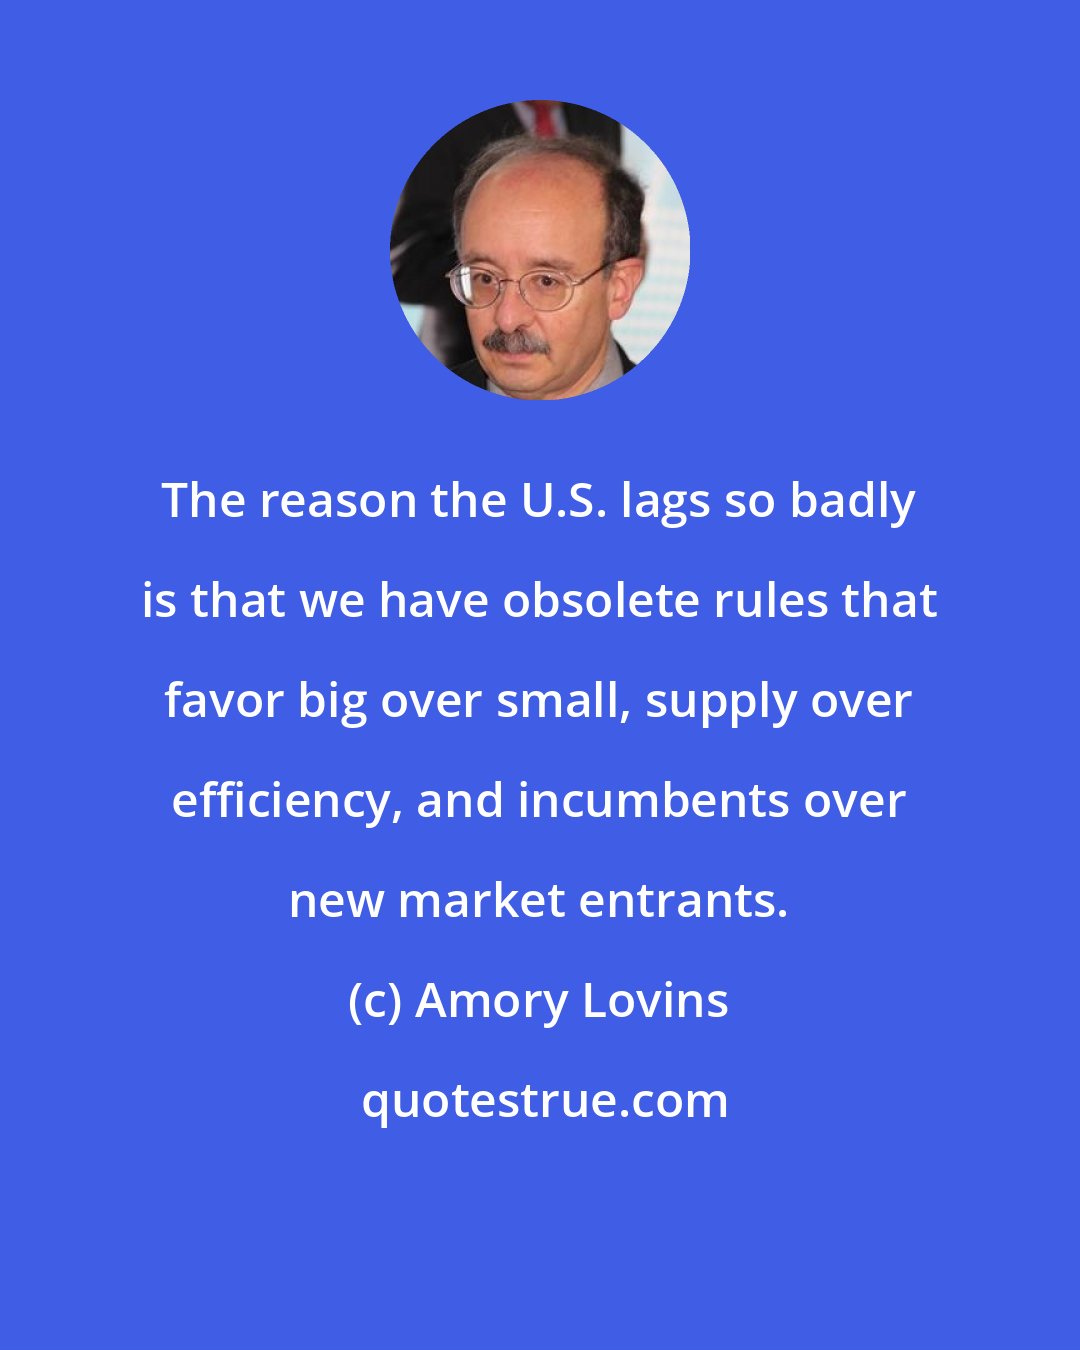 Amory Lovins: The reason the U.S. lags so badly is that we have obsolete rules that favor big over small, supply over efficiency, and incumbents over new market entrants.